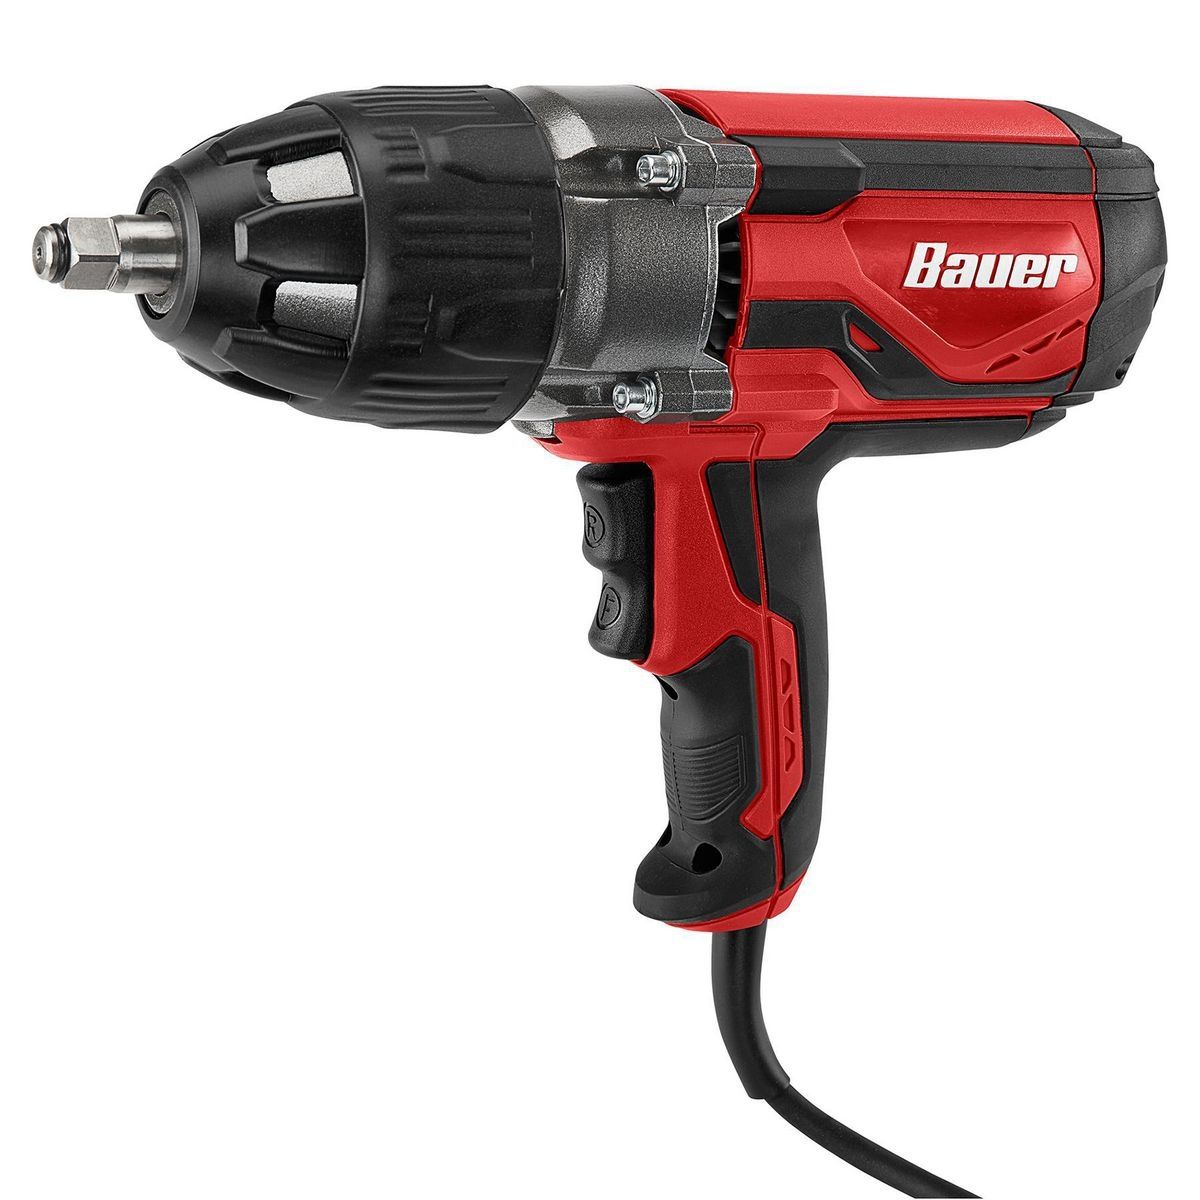 8.5 Amp 1/2 in. Impact Wrench with Rocker Switch